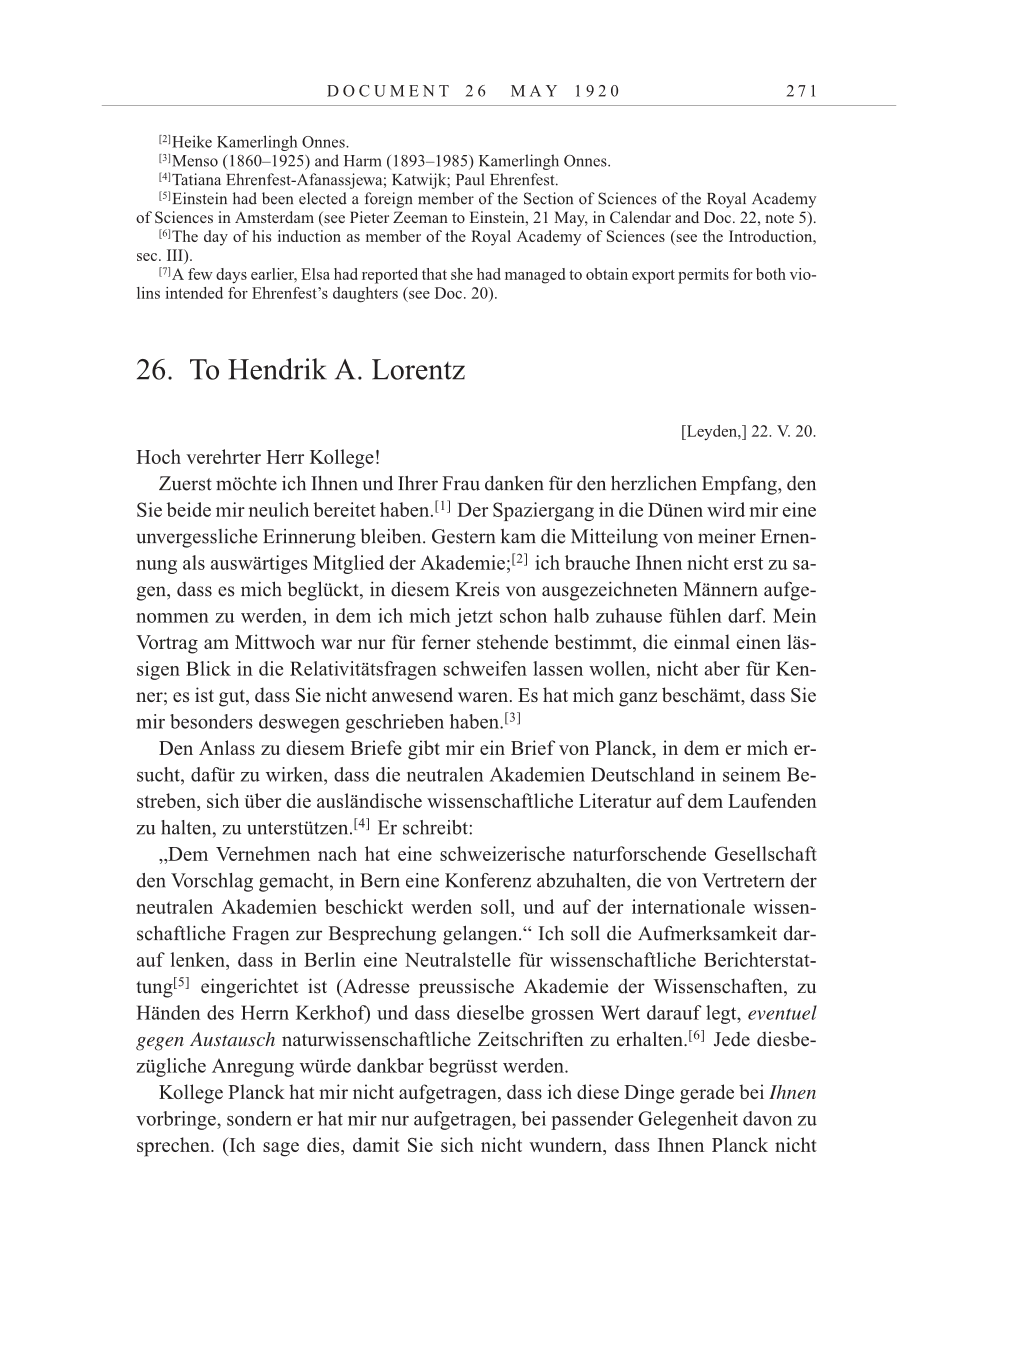 Volume 10: The Berlin Years: Correspondence May-December 1920 / Supplementary Correspondence 1909-1920 page 271